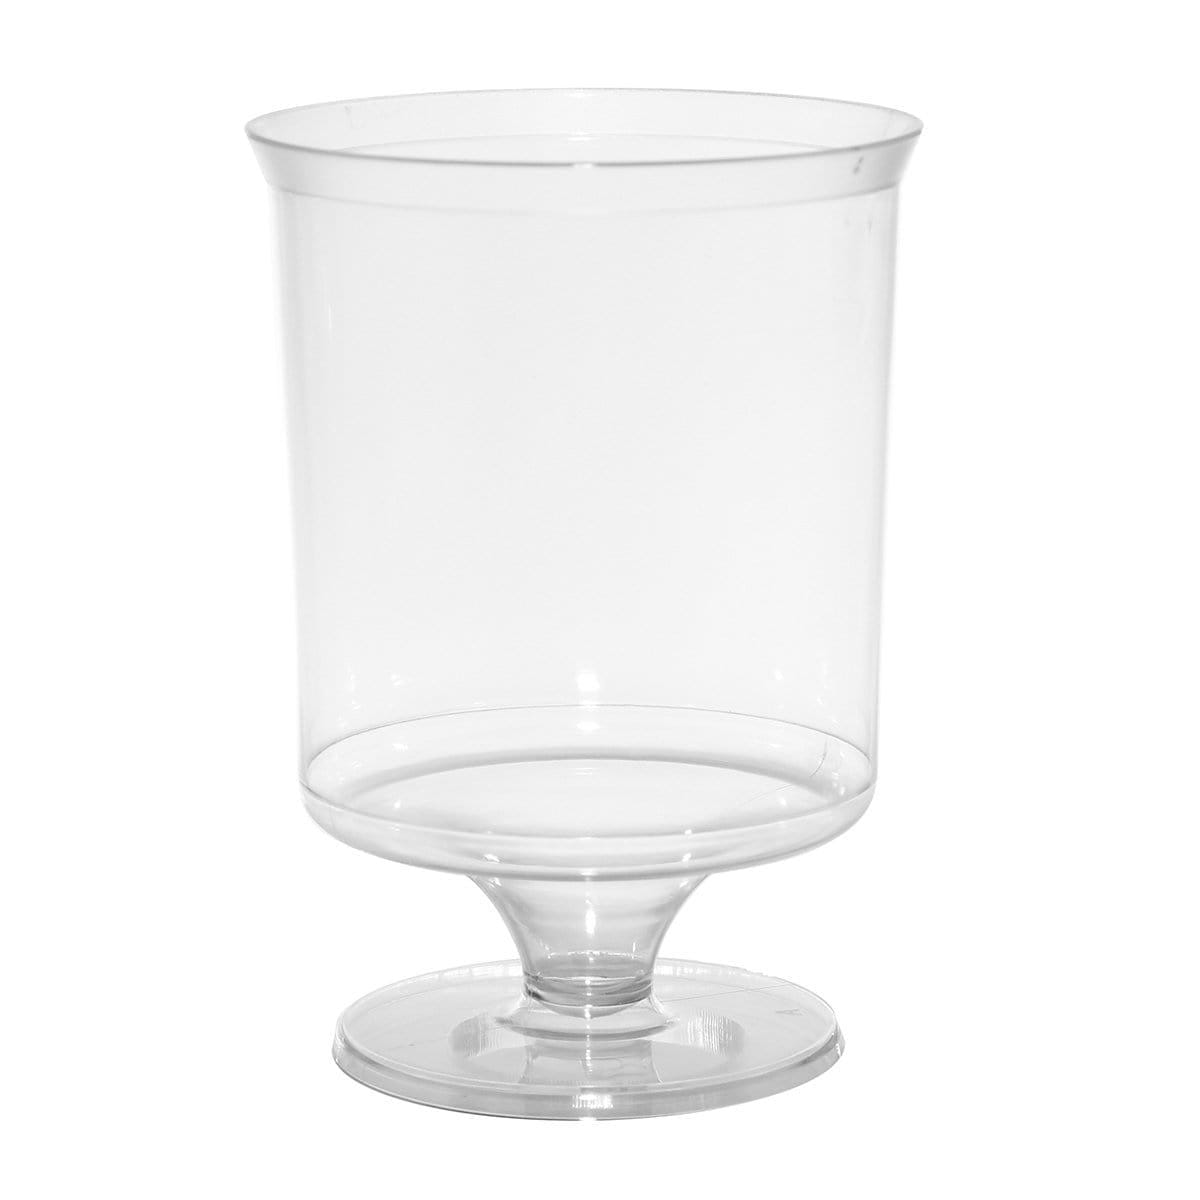 Buy Plasticware Wine glasses 5oz 6/pkg. sold at Party Expert